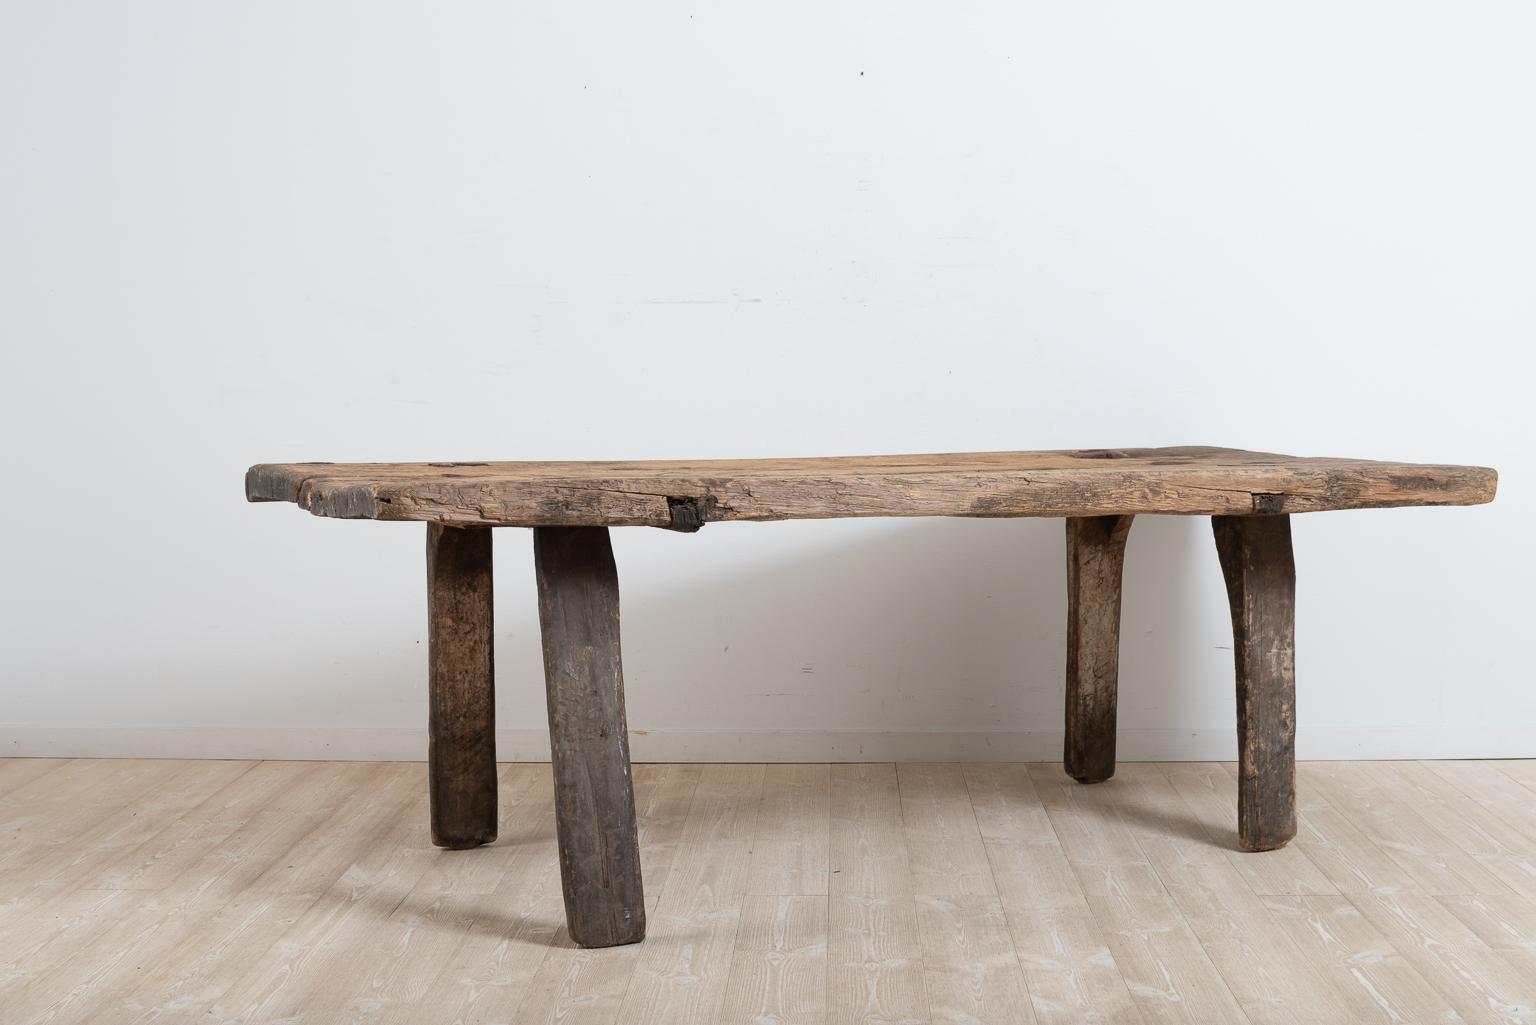 Hand-Crafted 17th Century Swedish Folk Art Table 'Hednabord'